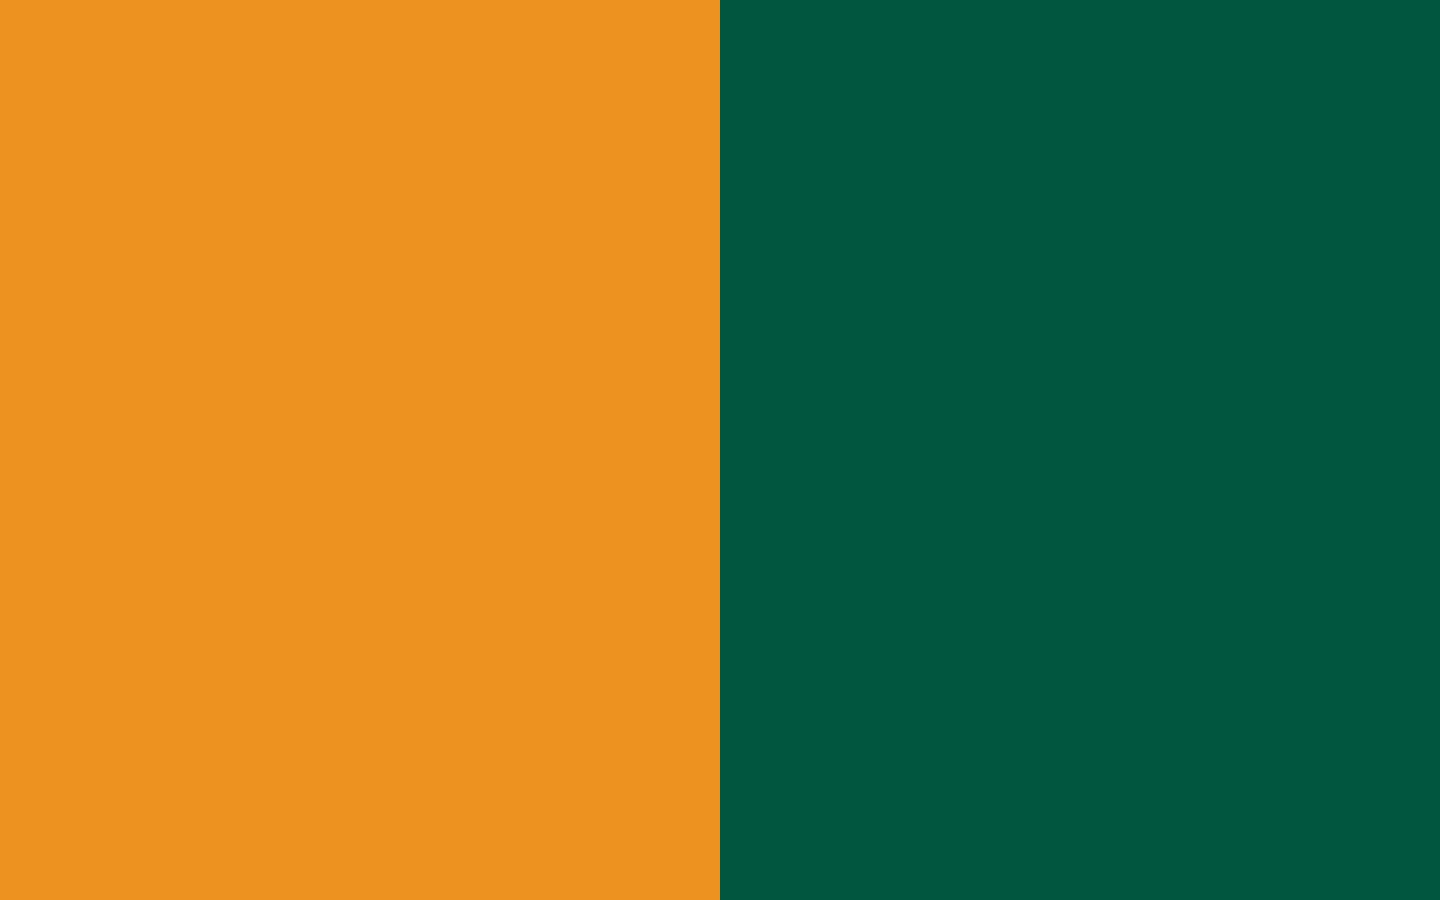 Carrot Orange and Castleton Green solid two color background